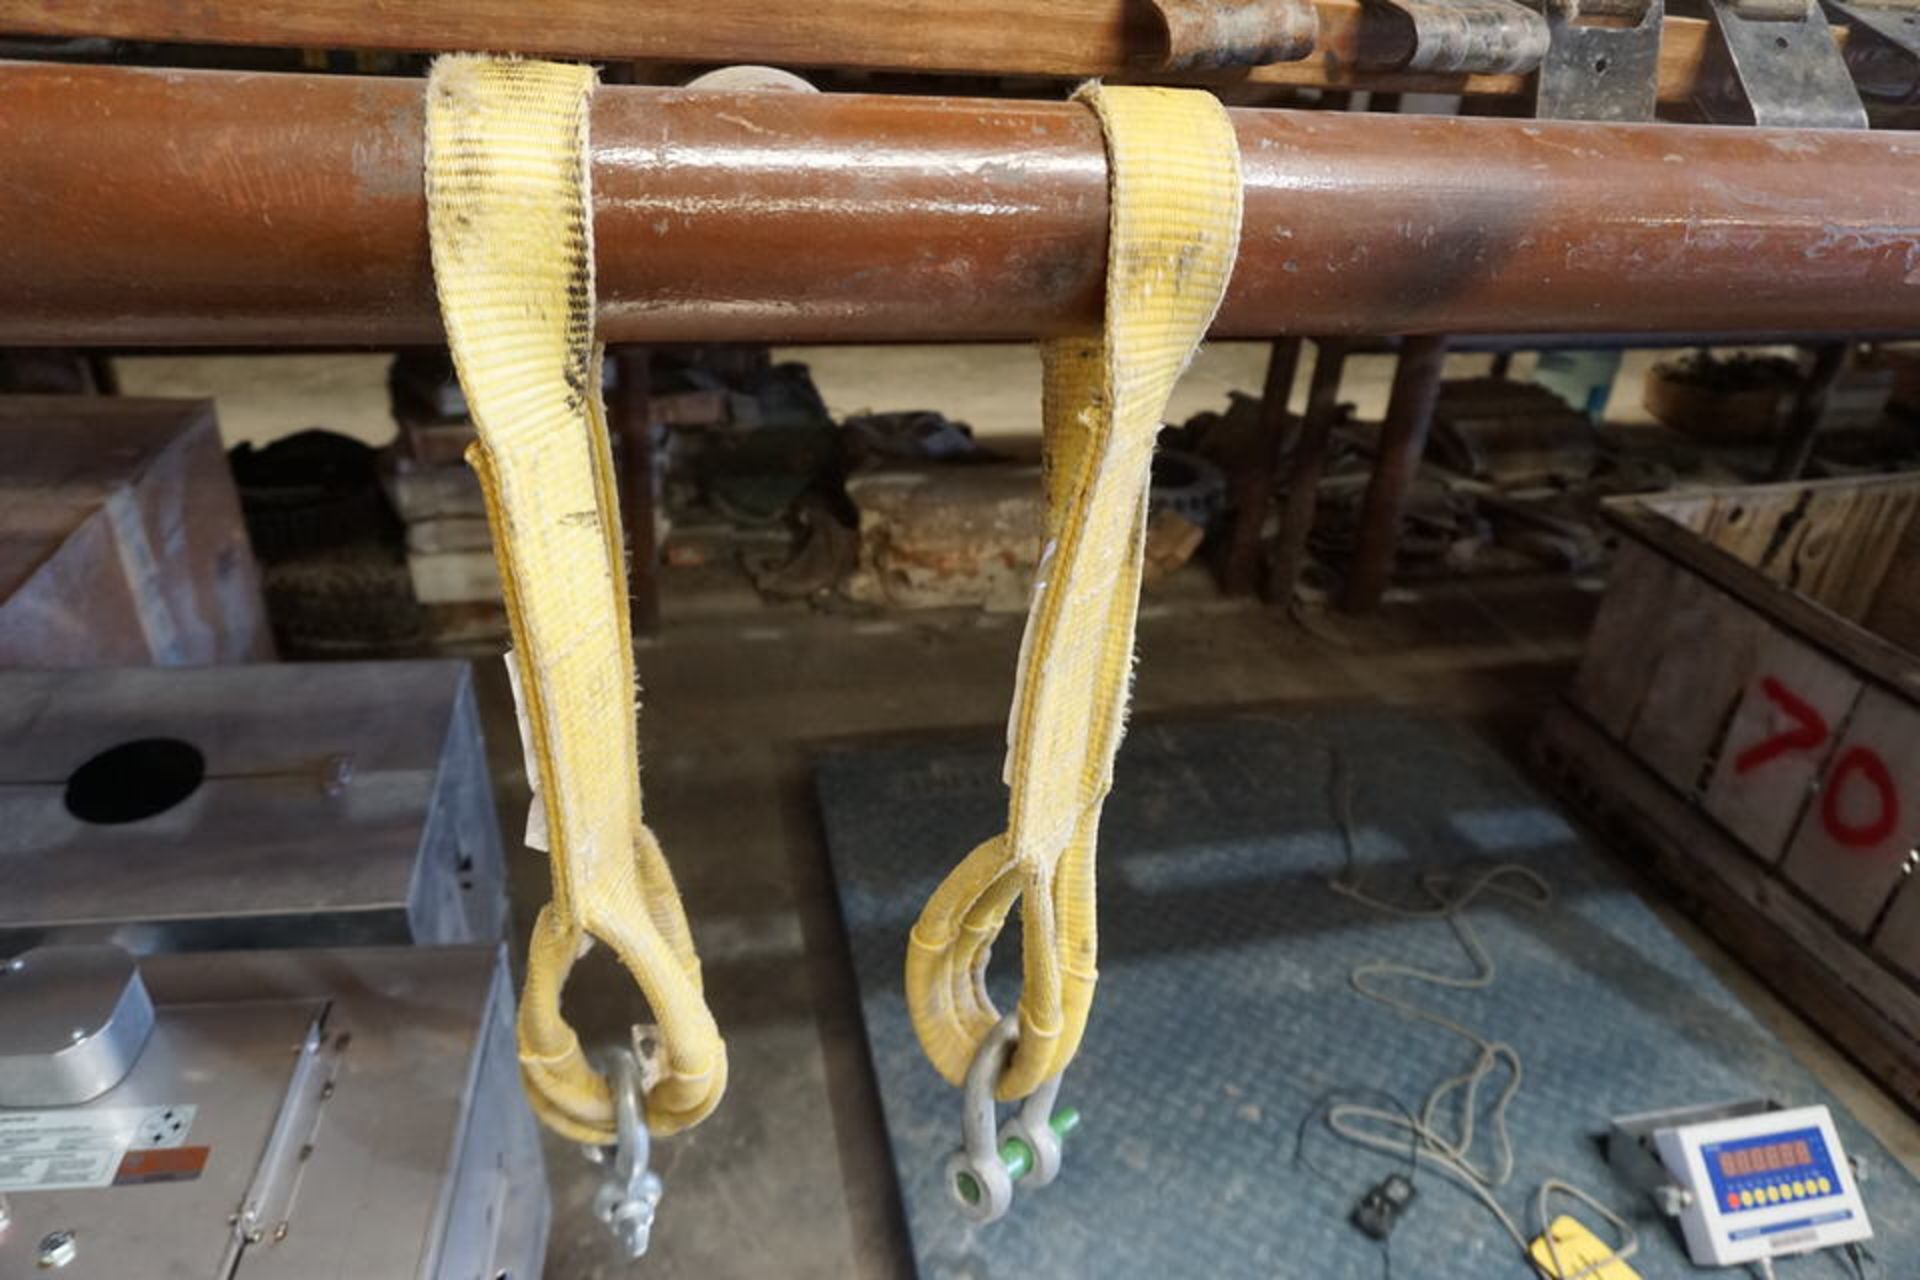 (7) GOOSENECK TRAILER HITCHES, (3) 4 WAY LUG WRENCHES, PALLET PULLER. LIFTING SLING, TRAILER STRAPS - Image 7 of 7